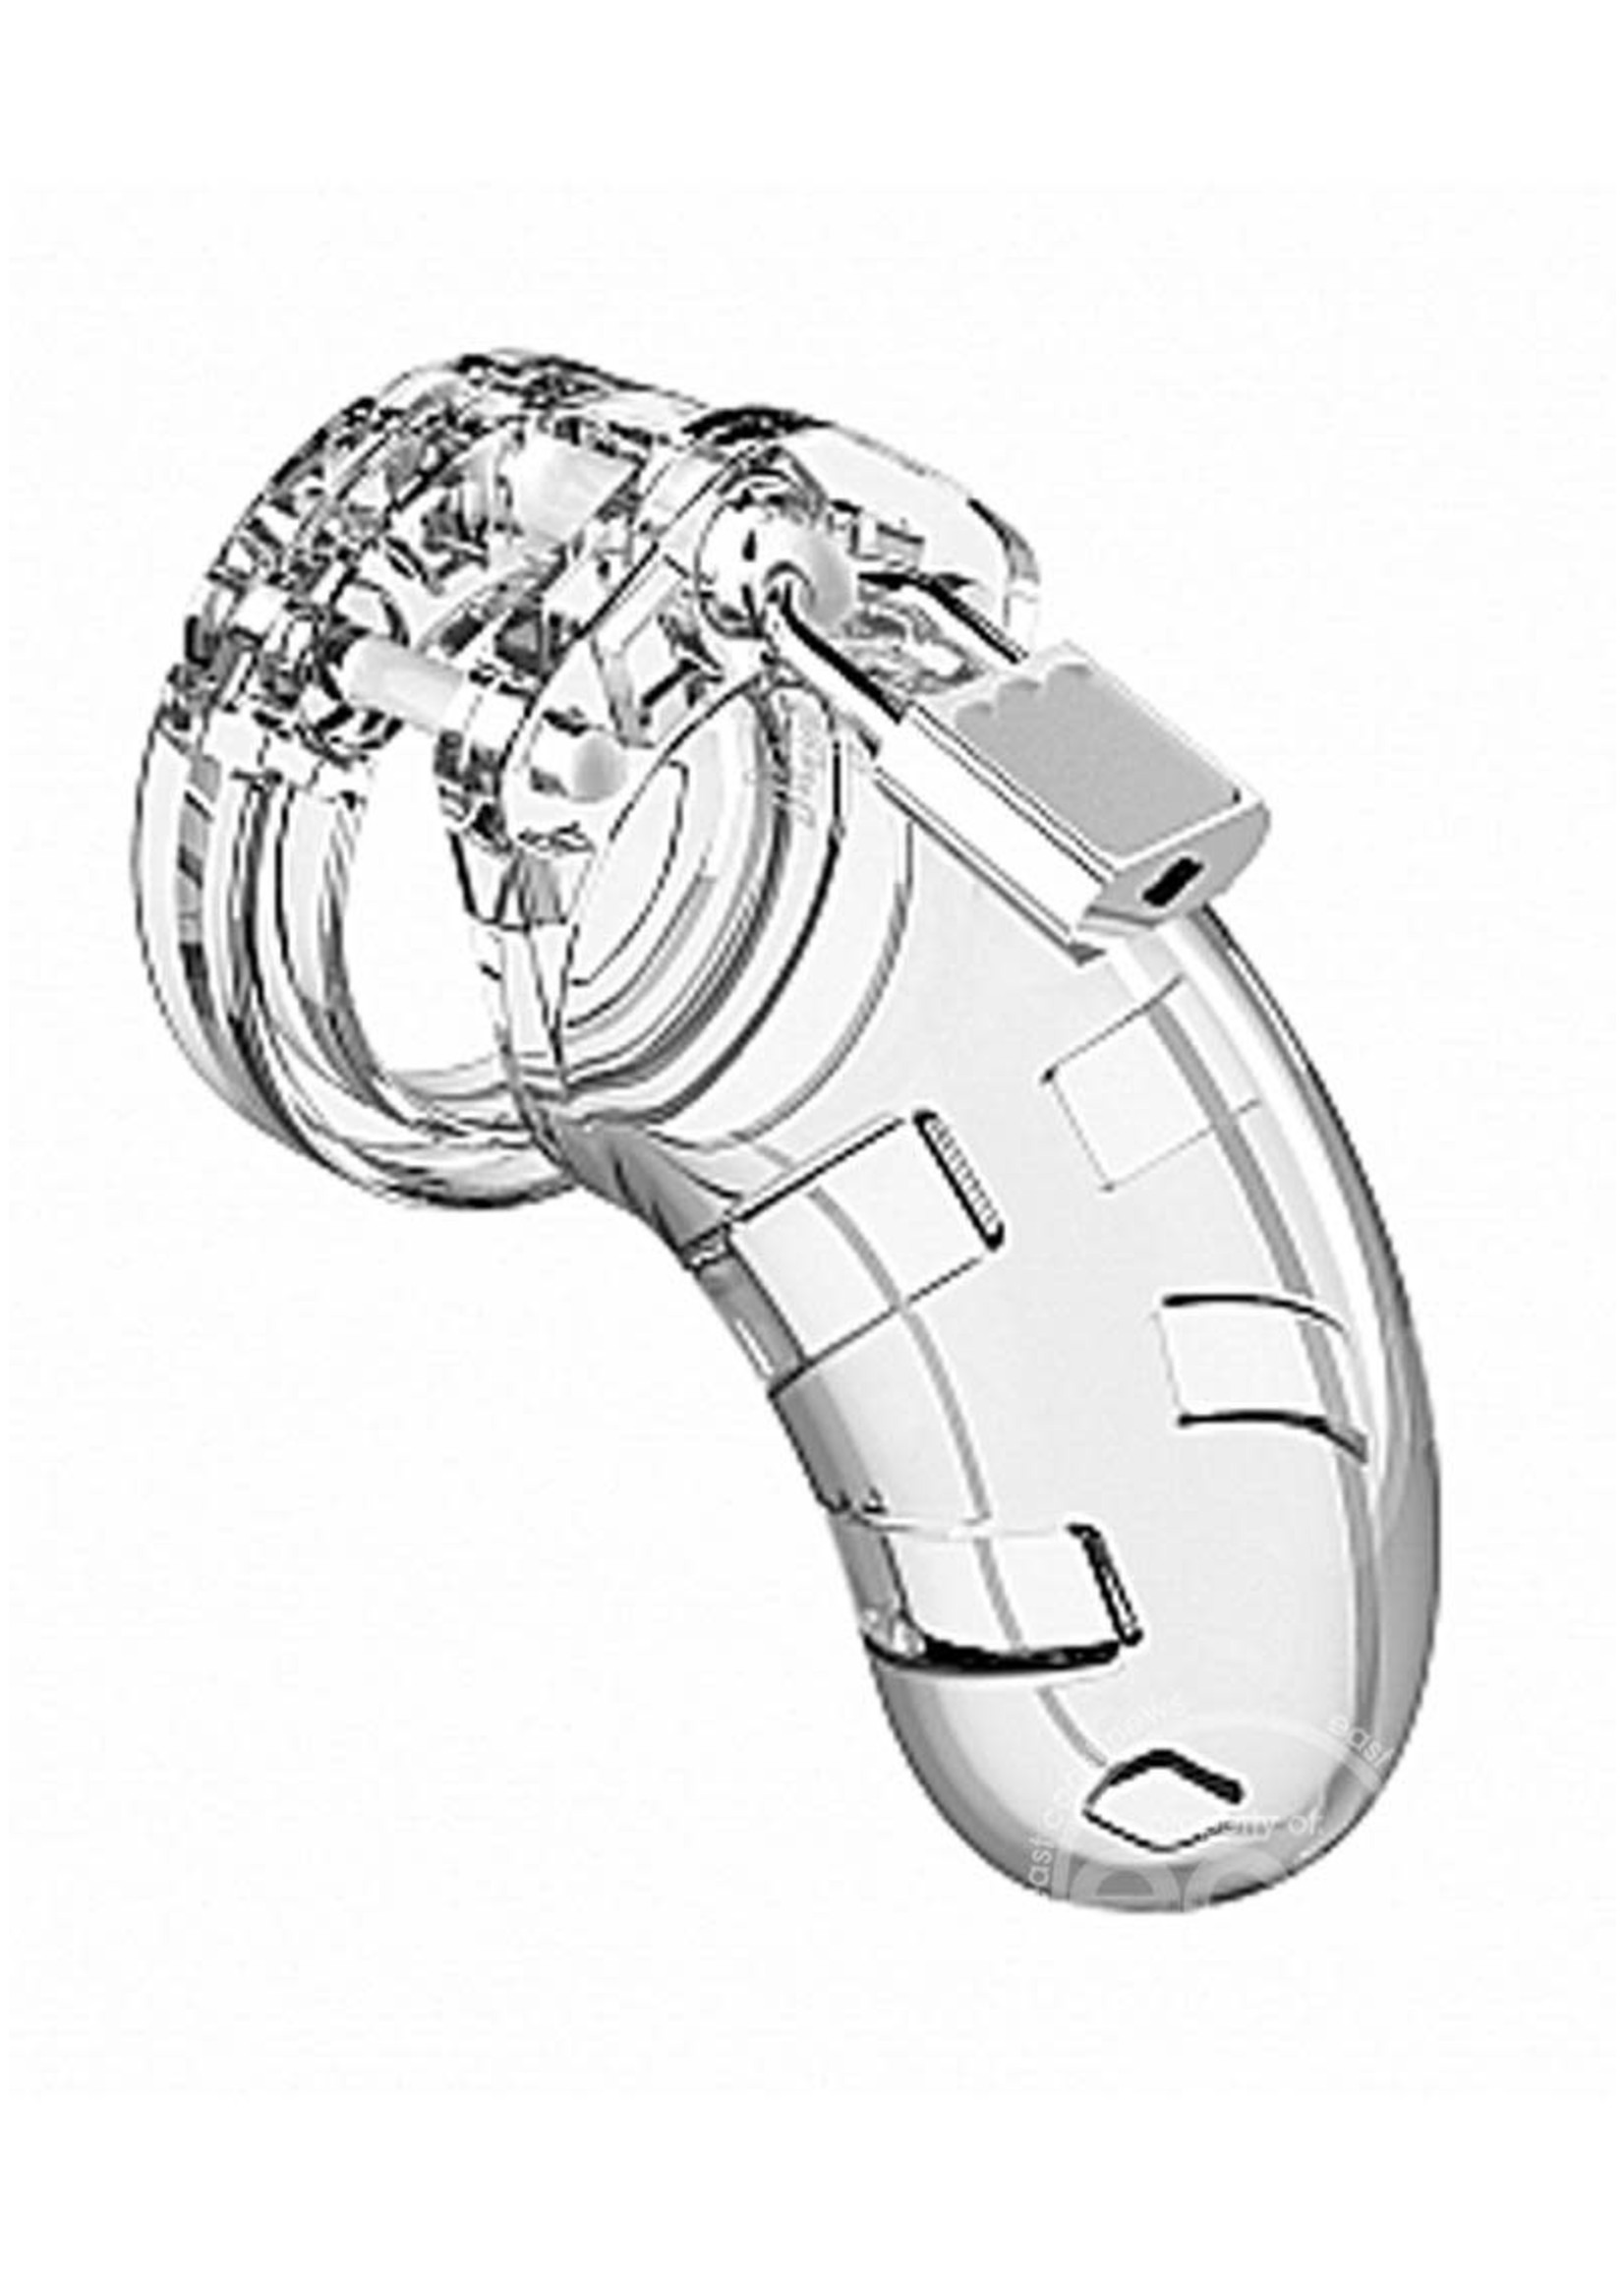 Man Cage Model 01 Male Chastity with Lock 3.5in - Clear